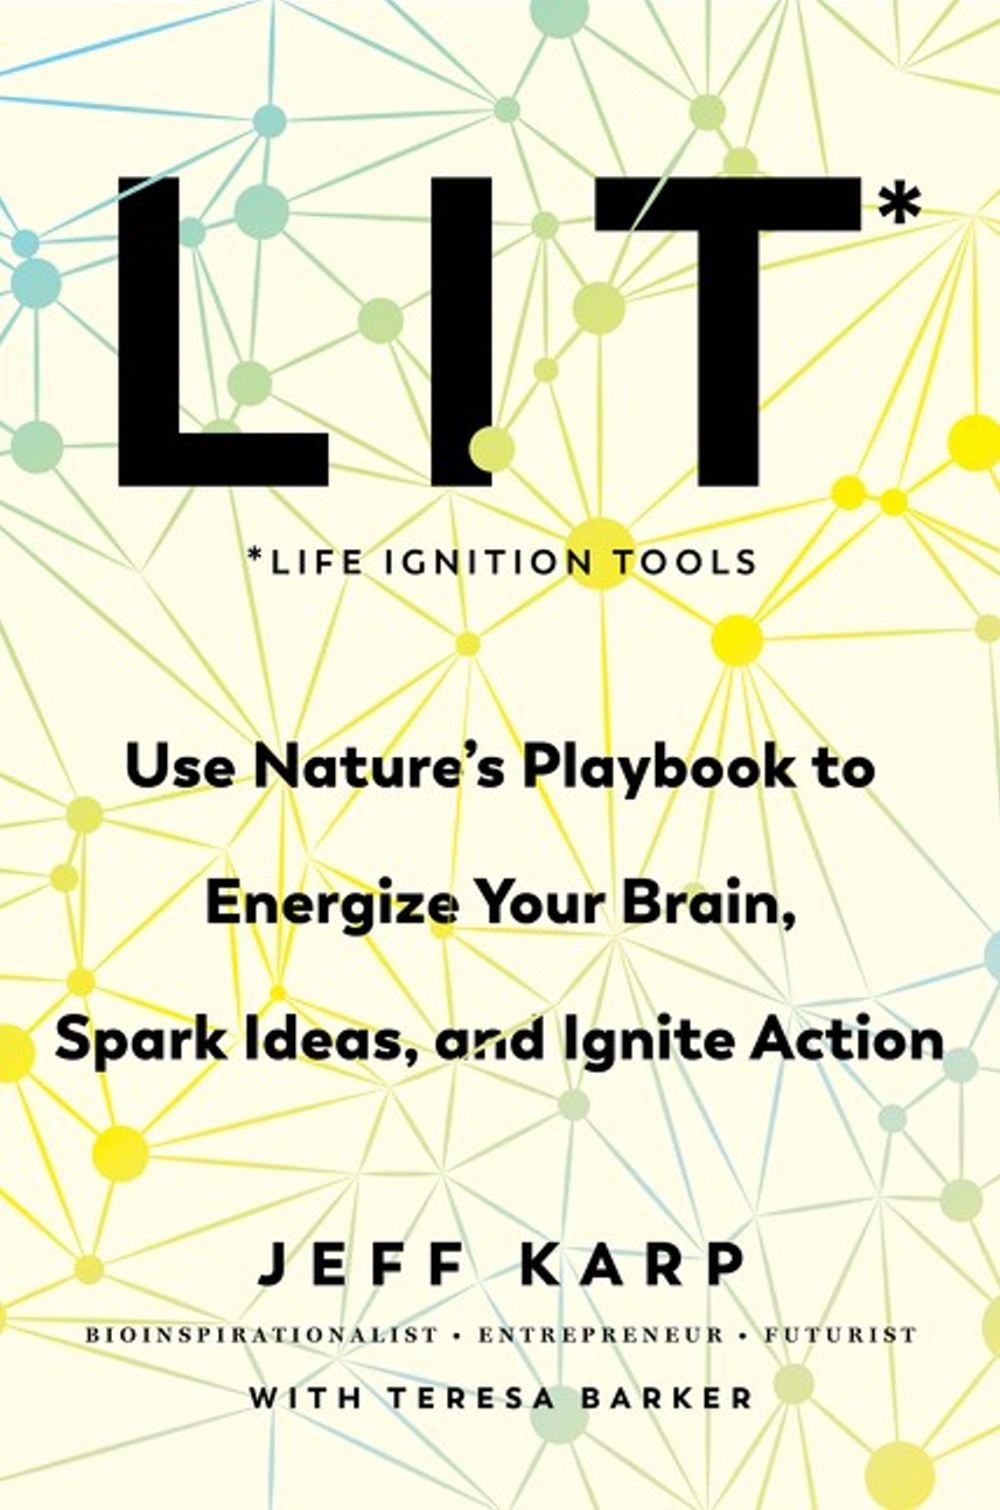 Lit: Life Ignition Tools: Use Nature’s Playbook to Energize Your Brain, Spark Ideas, and Ignite Action